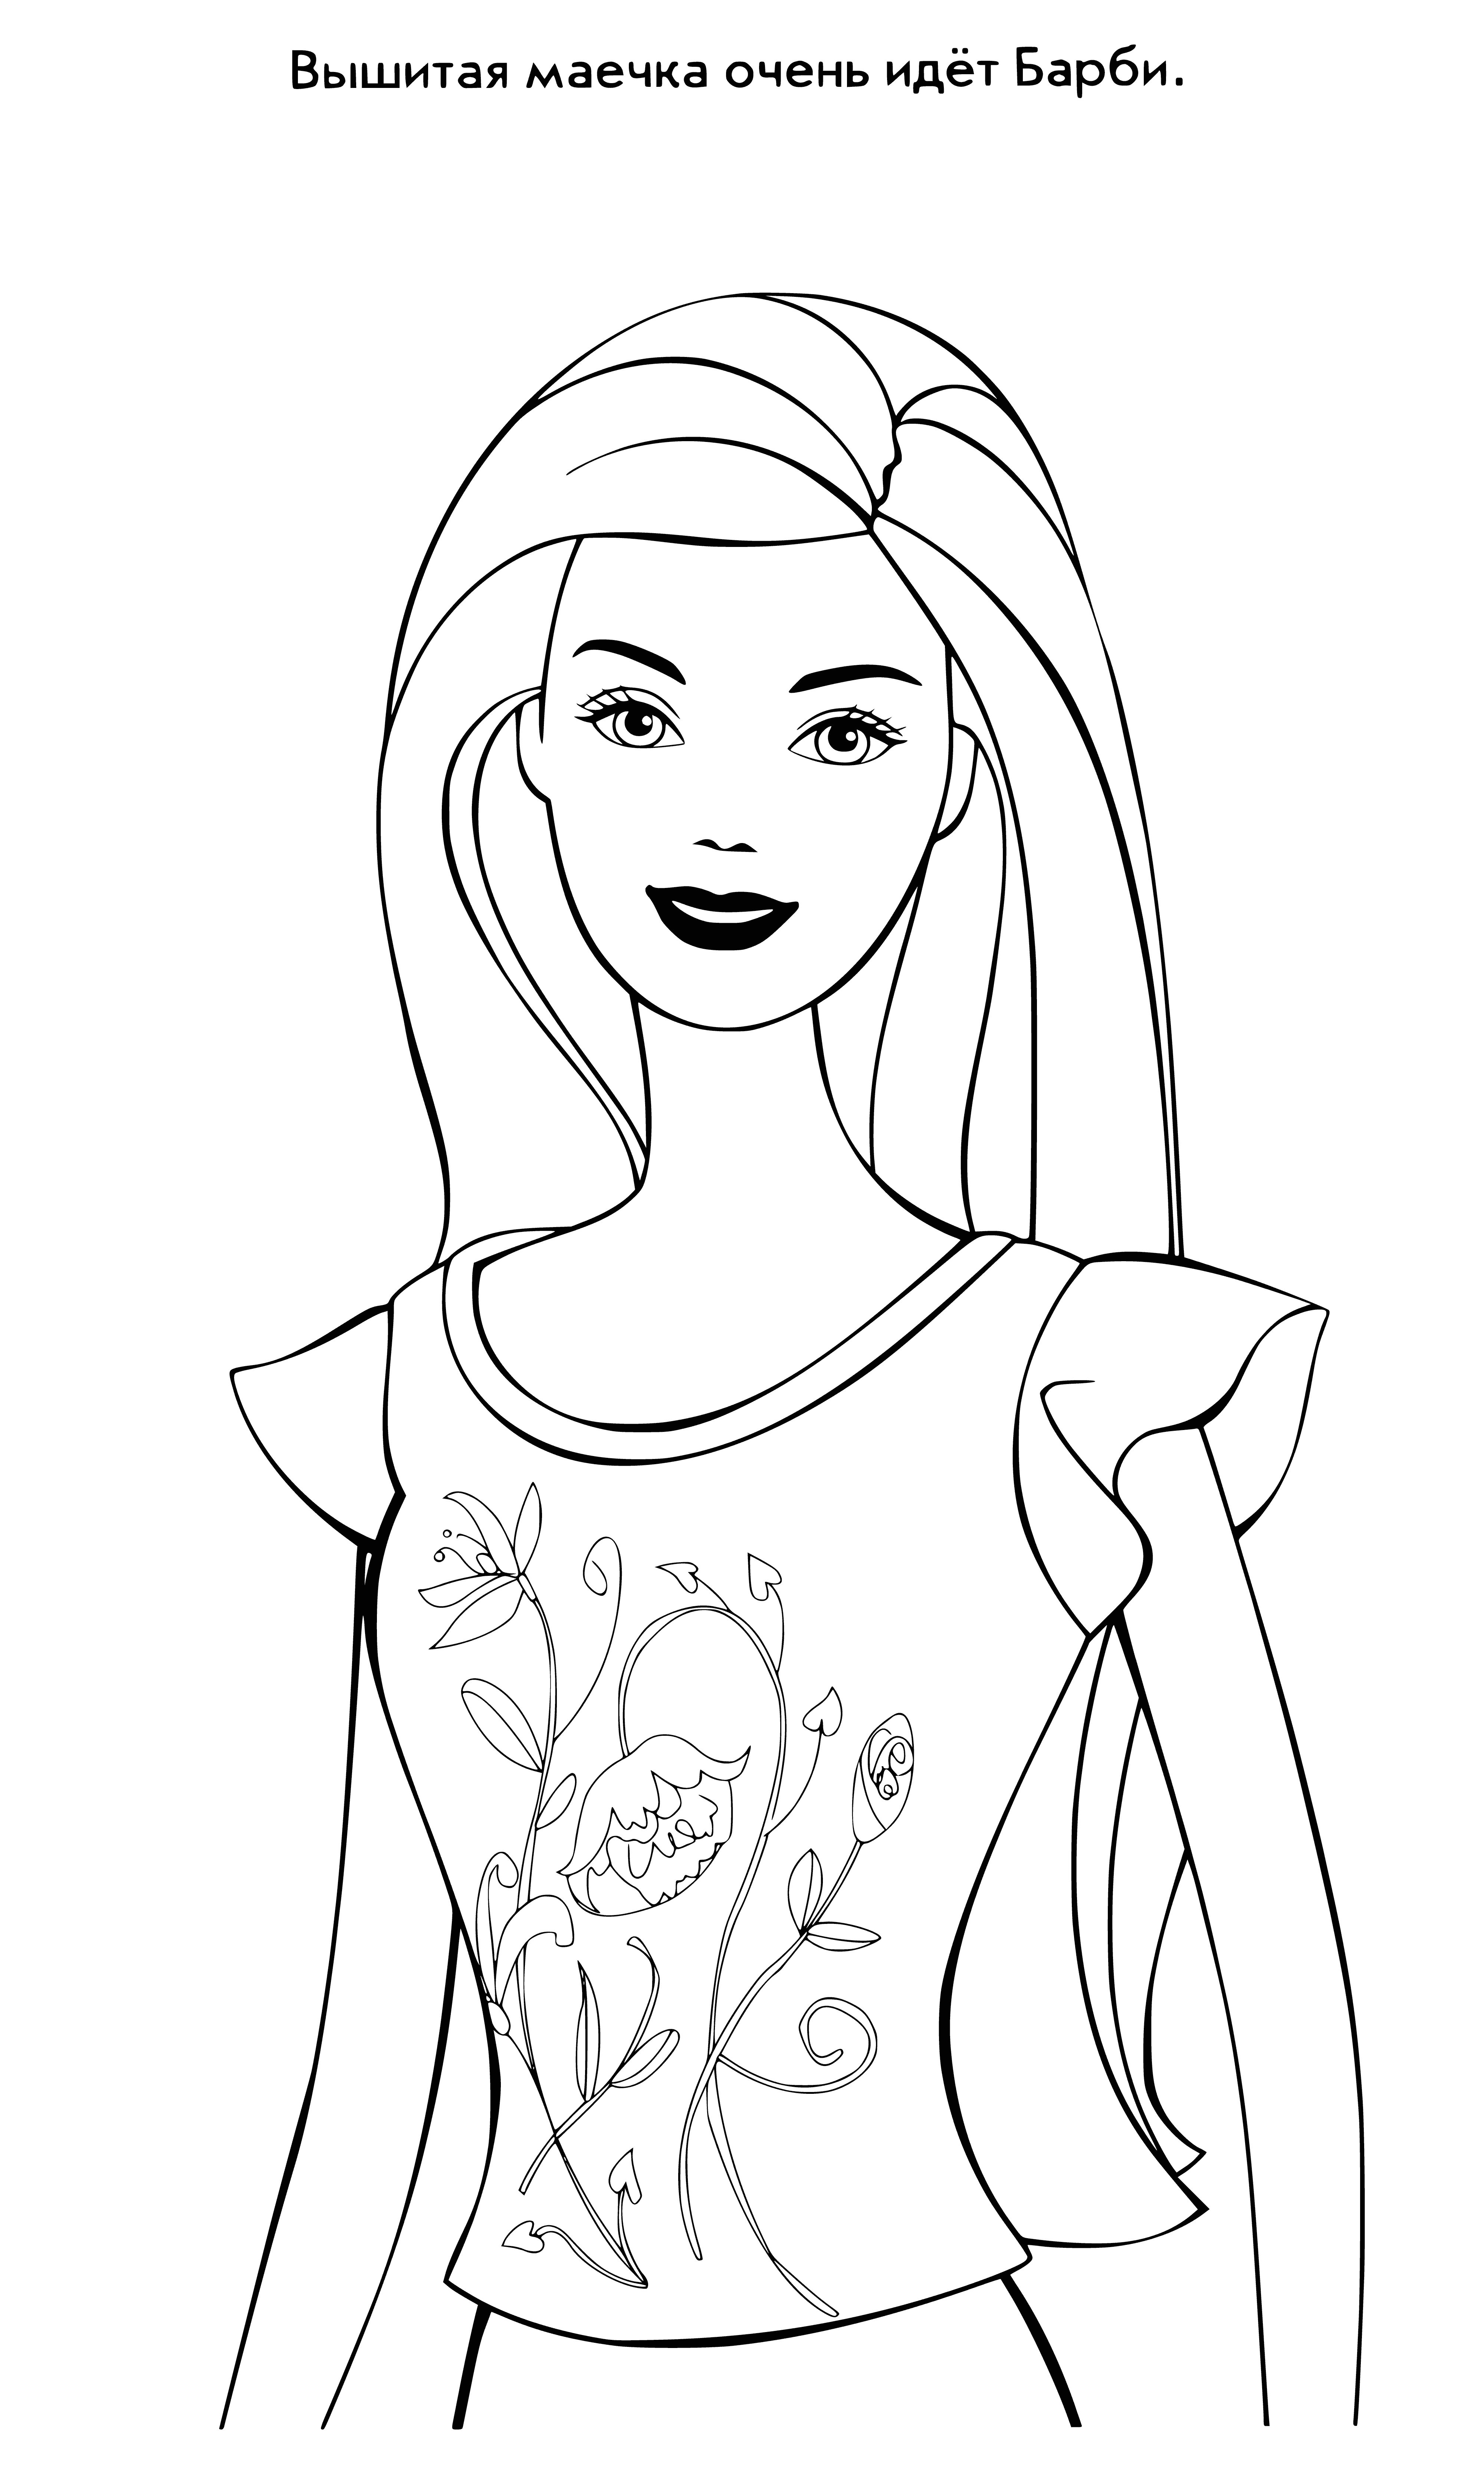 coloring page: Barbie wears a white dress w/blue sash & her hair in a bun, smiling as a yellow paper butterfly is taped to her foot.